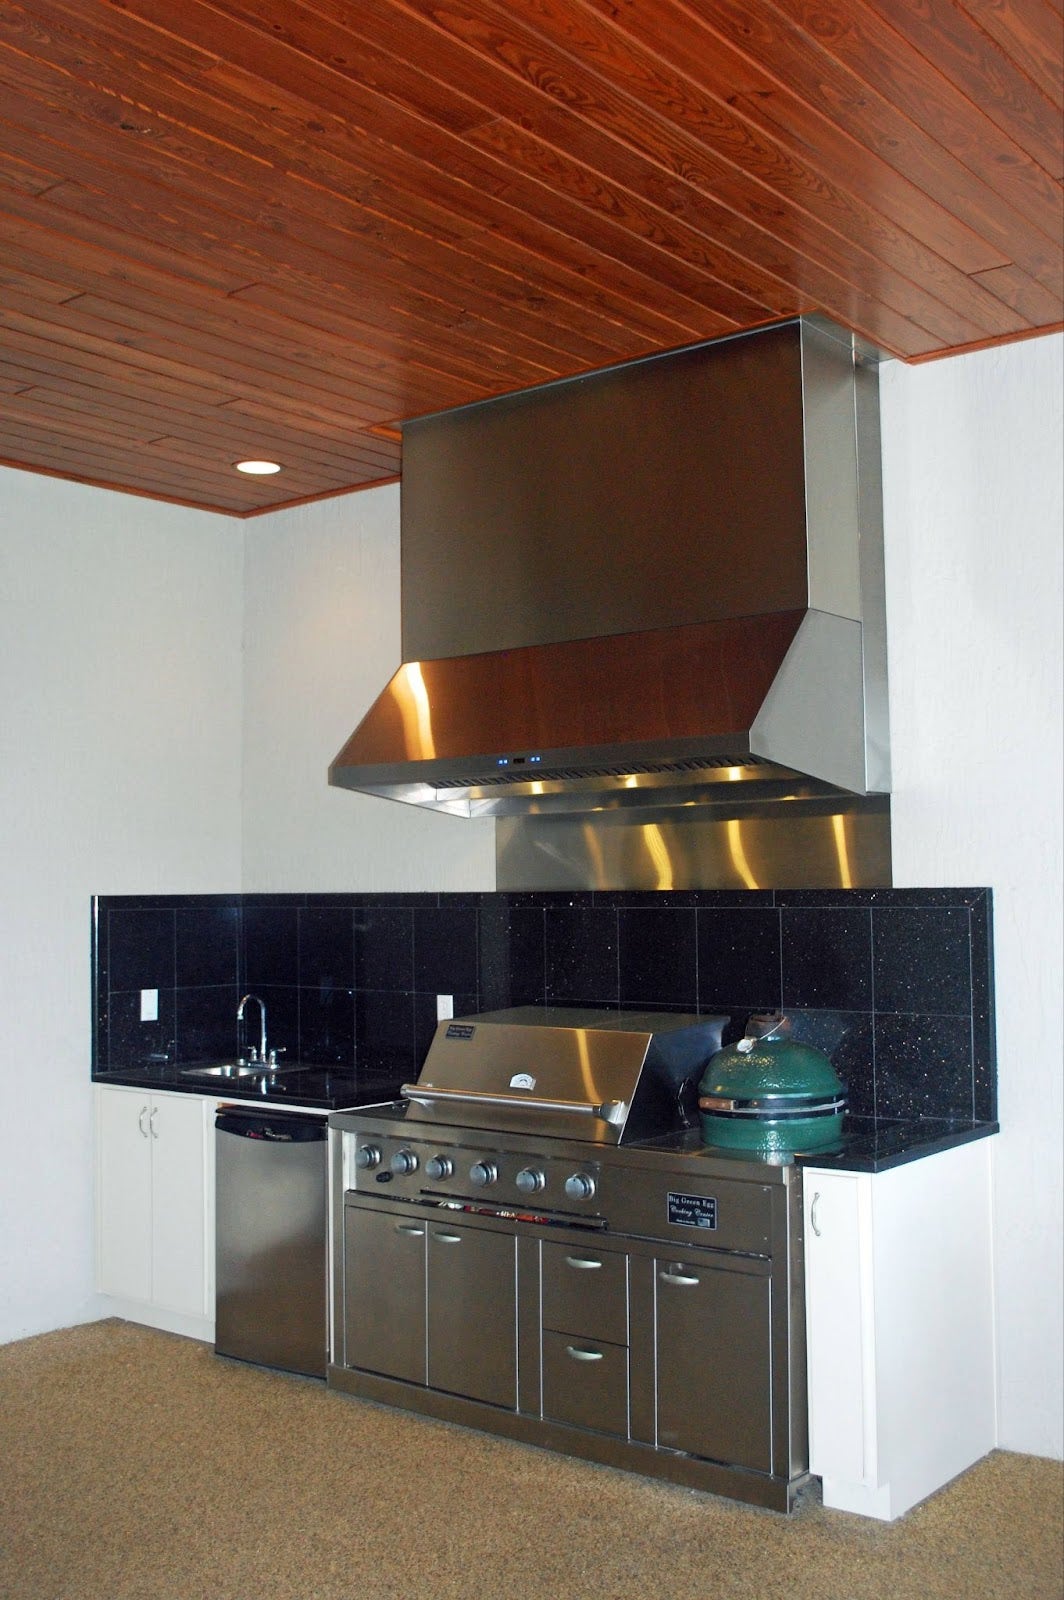 Modern home grilling station featuring a Proline range hood, stainless steel appliances, and dark countertops, with a warm wooden ceiling for contrast - prolinerangehoods.com.